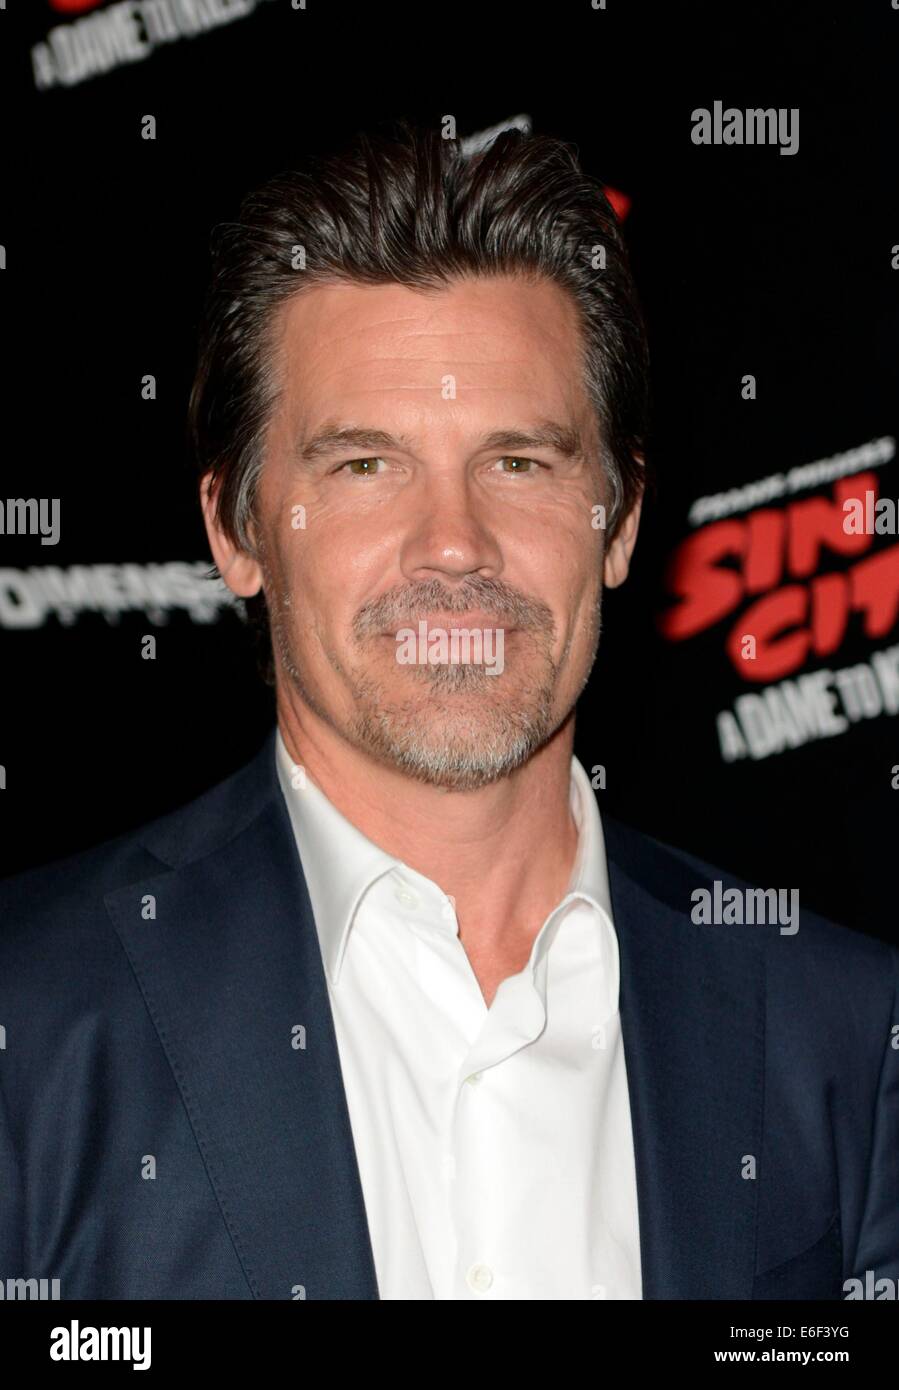 New York, NY, USA. 21st Aug, 2014. Josh Brolin in attendance for SIN CITY: A DAME TO KILL FOR Photo Opportunity, Crosby Street Hotel, New York, NY August 21, 2014. © Derek Storm/Everett Collection/Alamy Live News Stock Photo